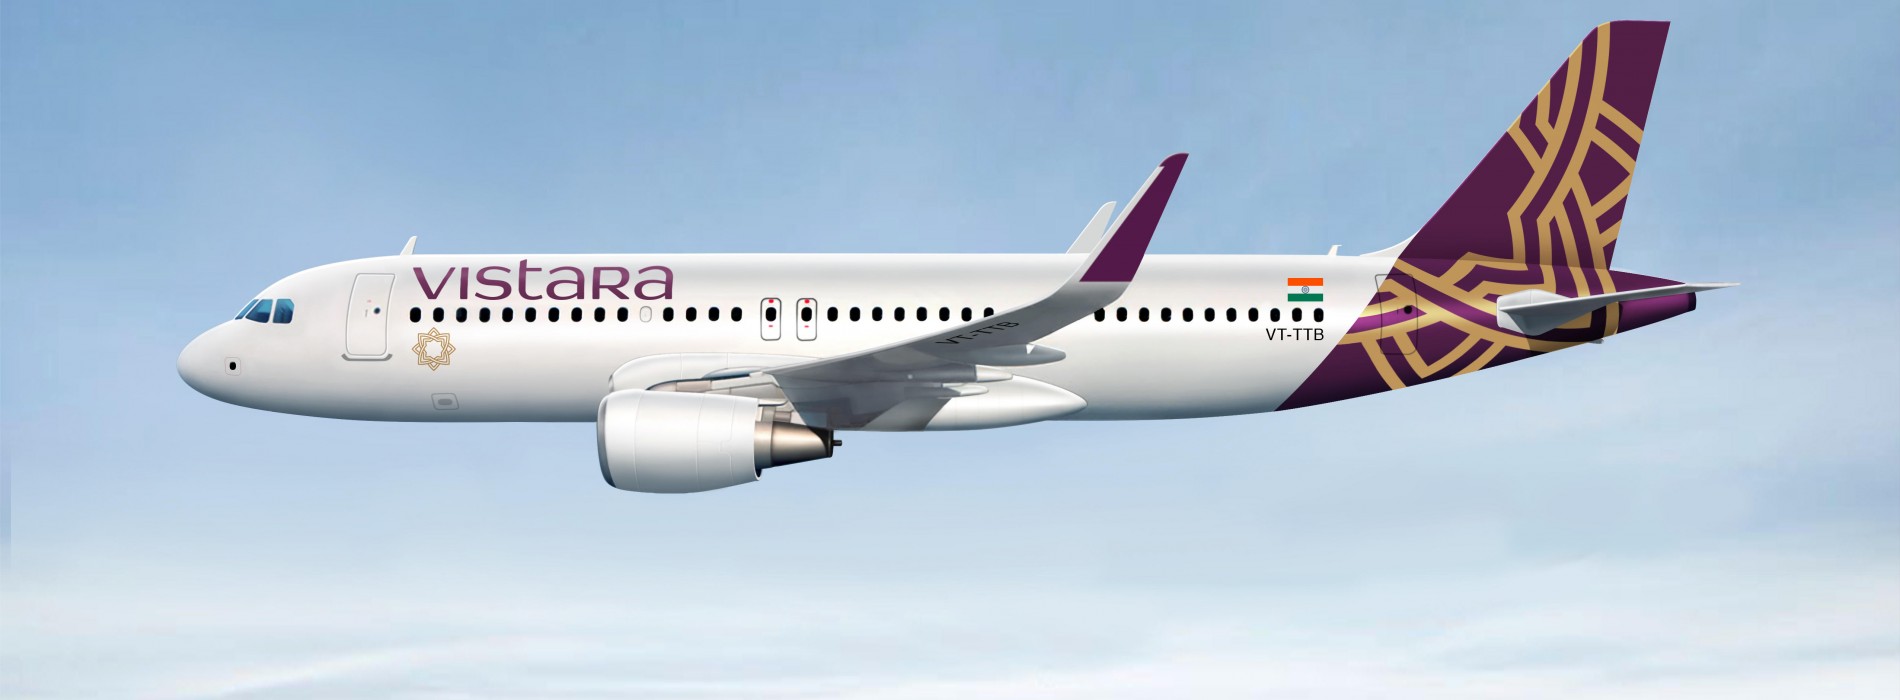 Vistara ready to offer free date and flight change due to existing conditions in Srinagar